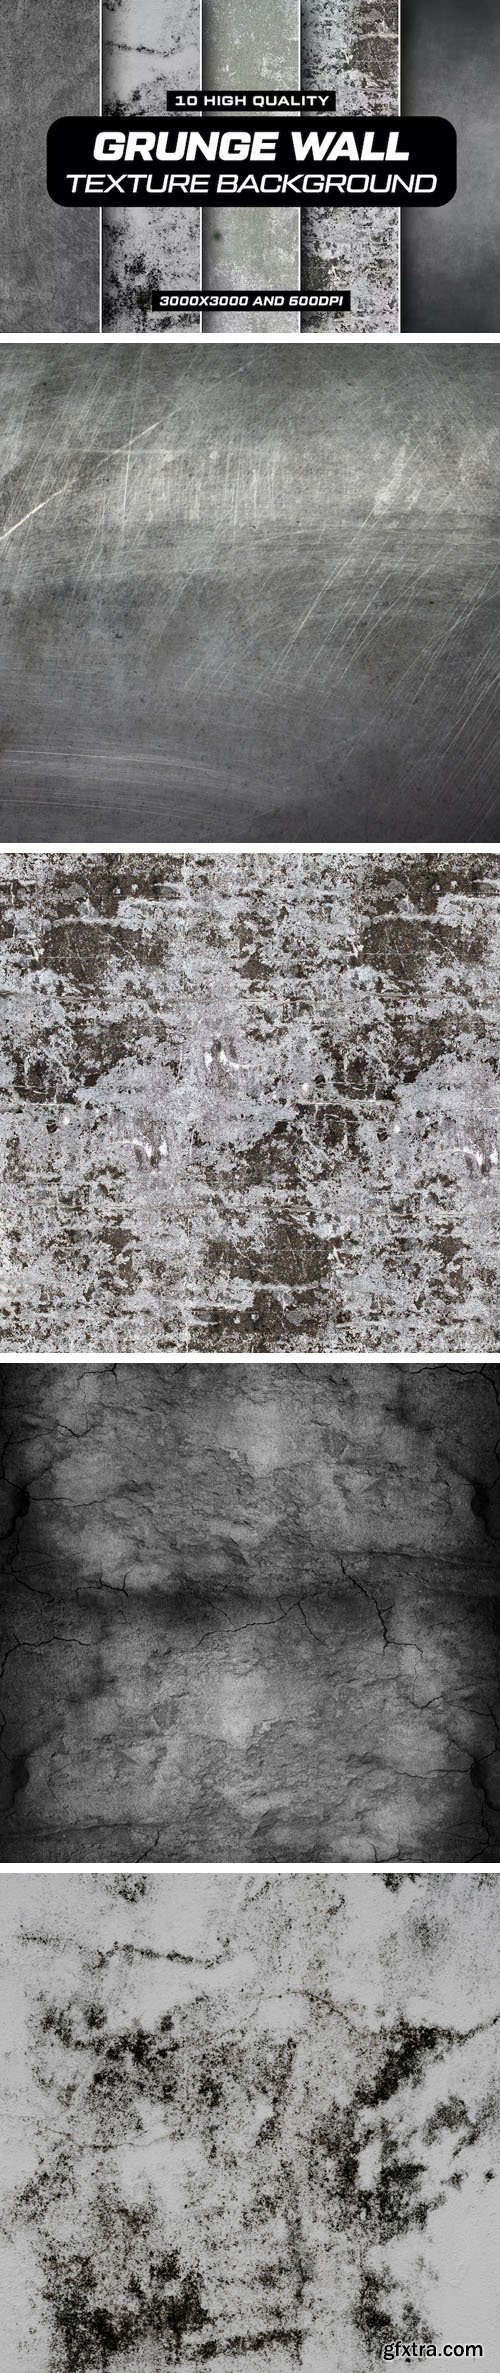 10 Grunge Wall Texture Backgrounds